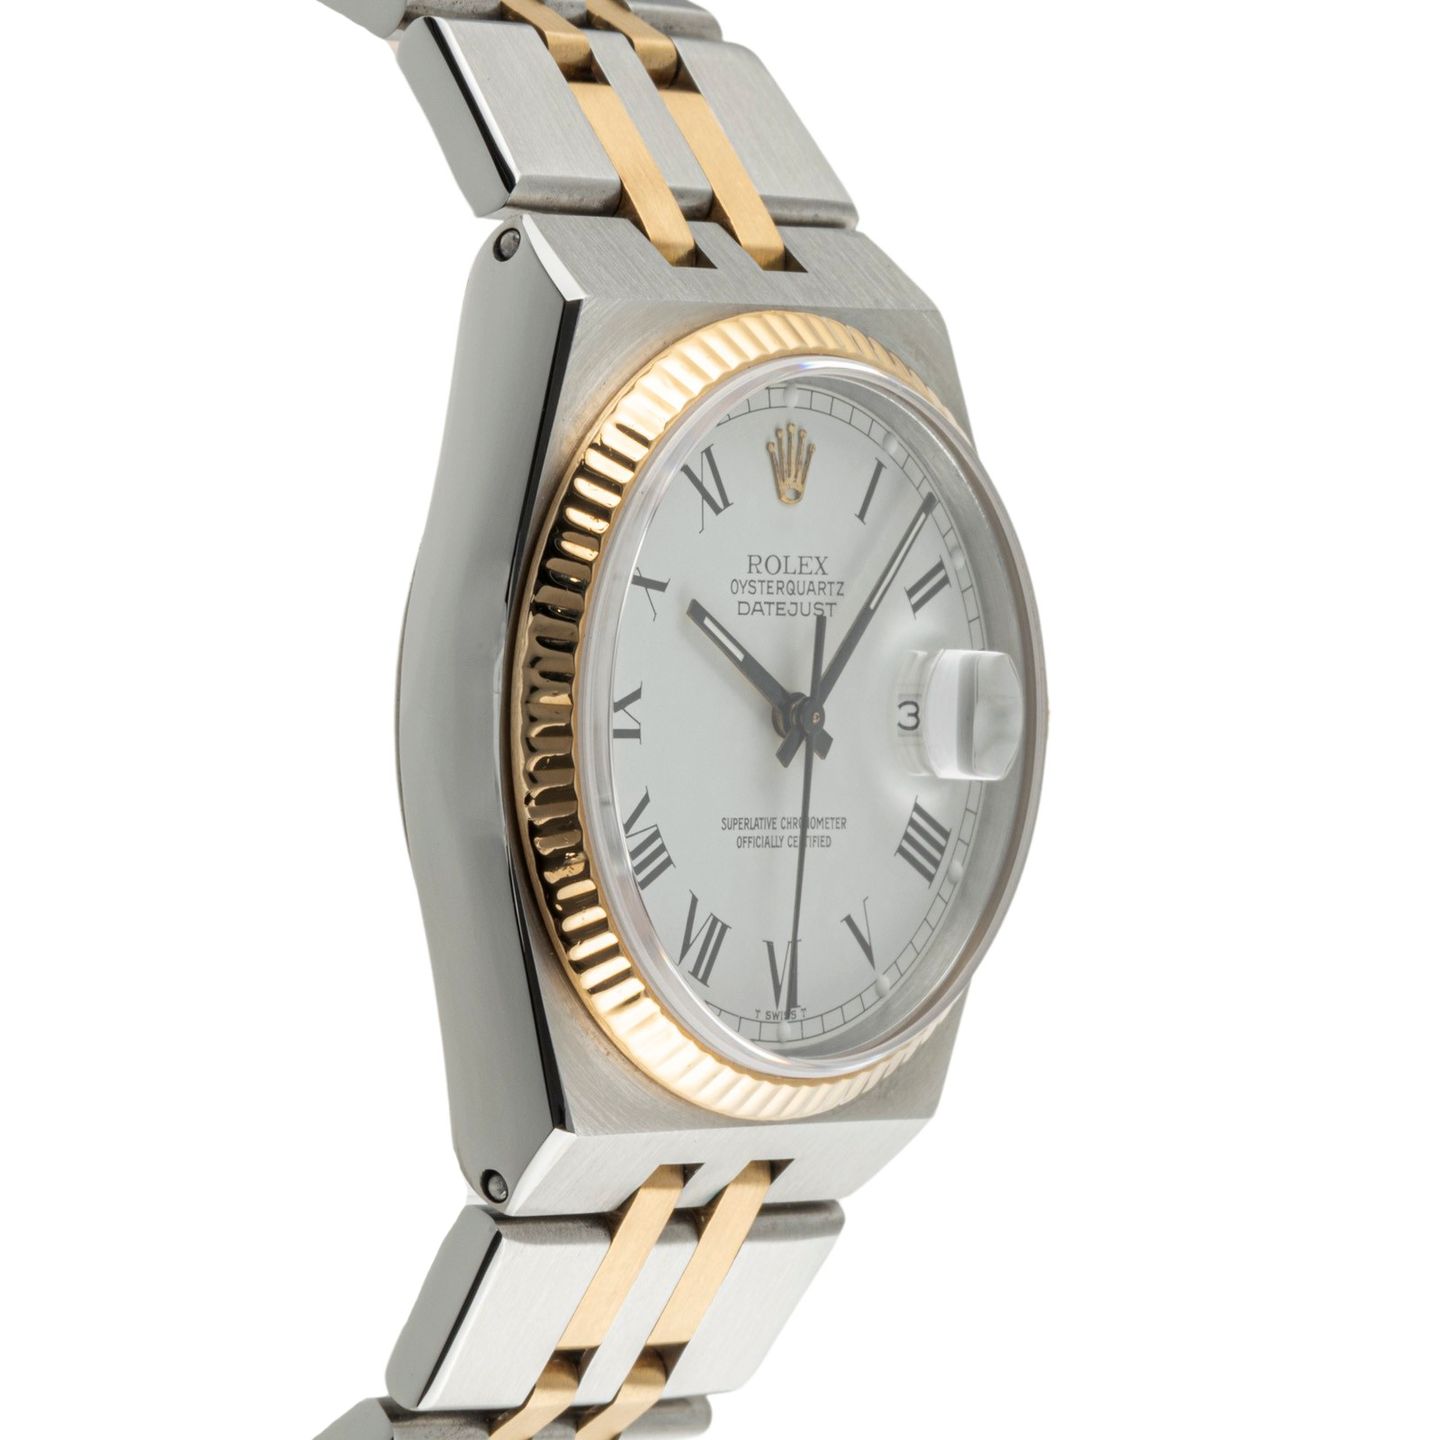 Rolex Datejust Oysterquartz 17013 (1985) - 36mm Goud/Staal (6/8)